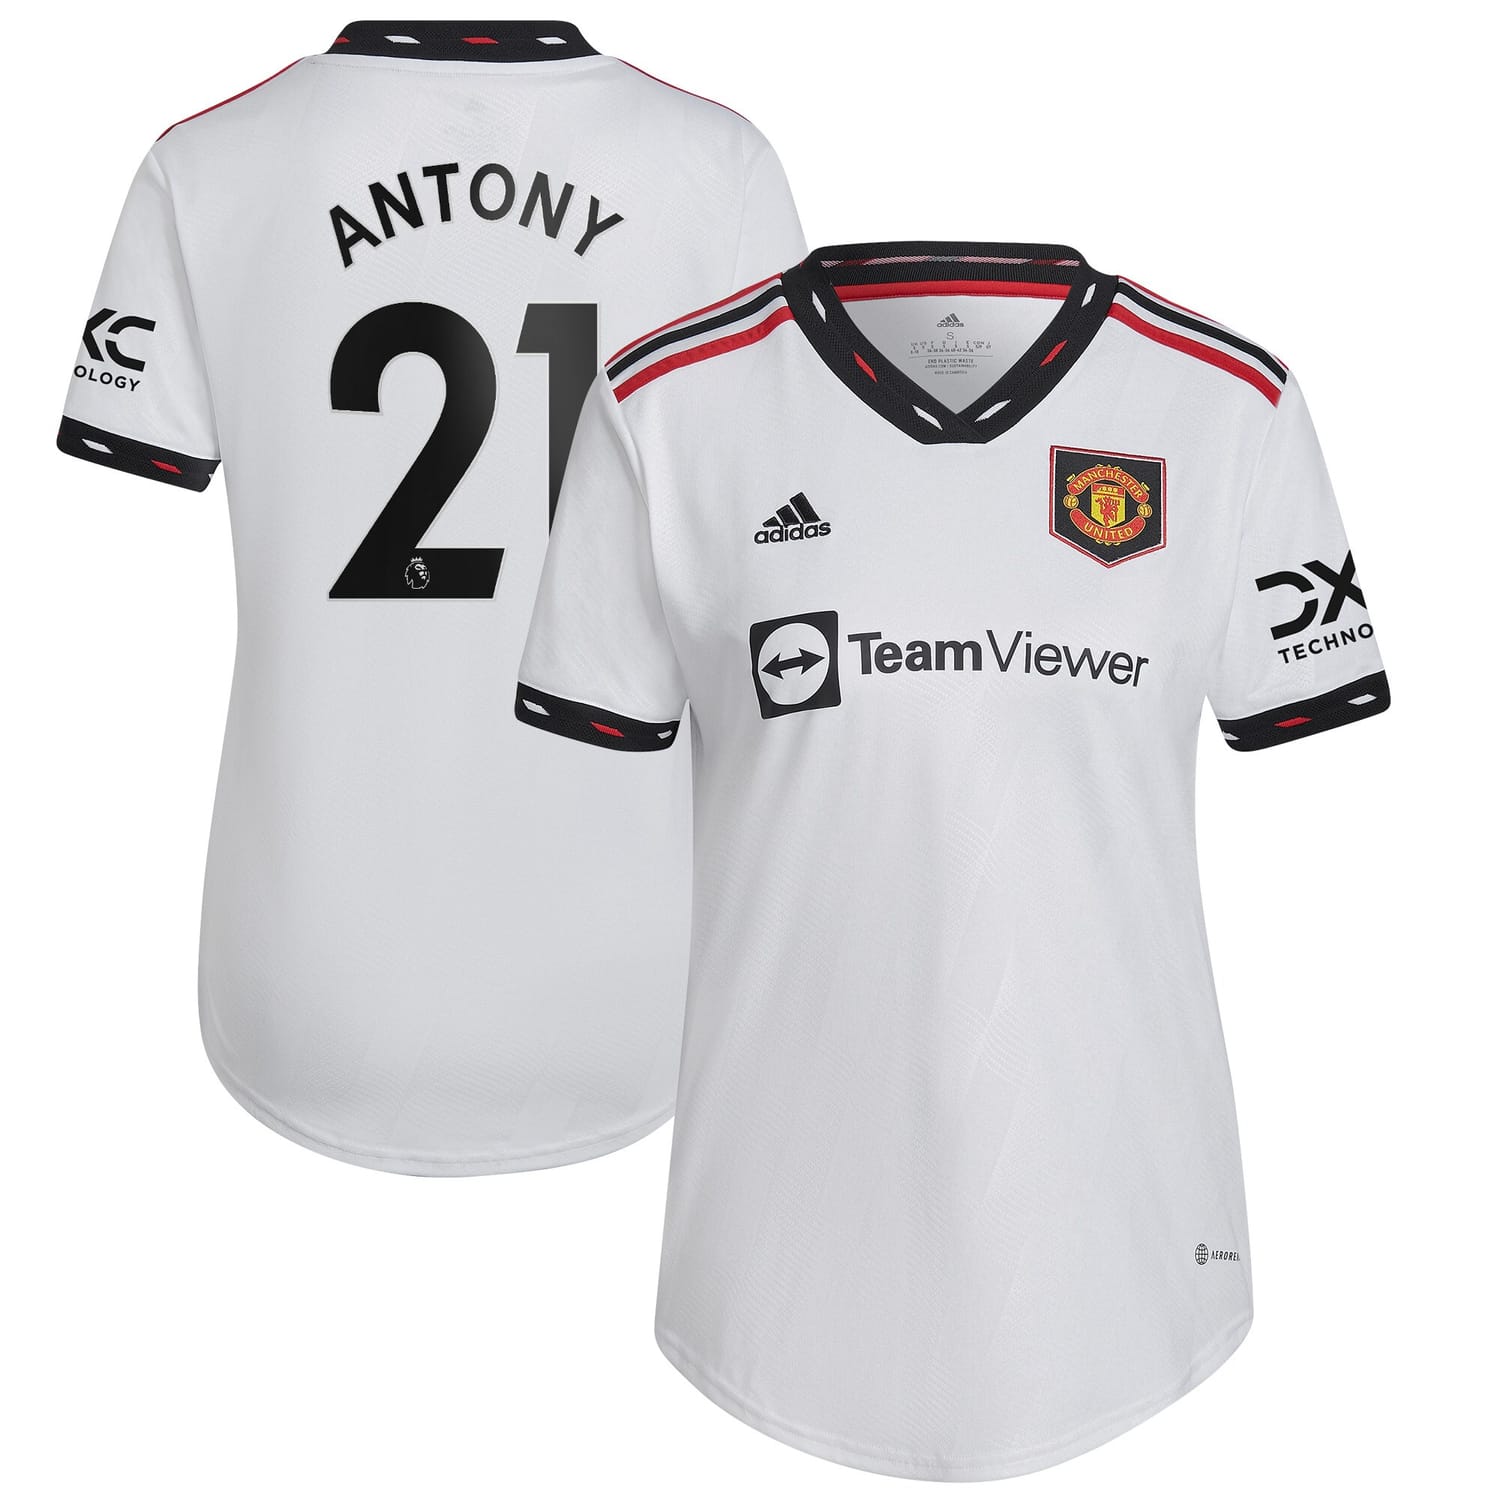 Premier League Manchester United Away Jersey Shirt White 2022-23 player Antony printing for Women